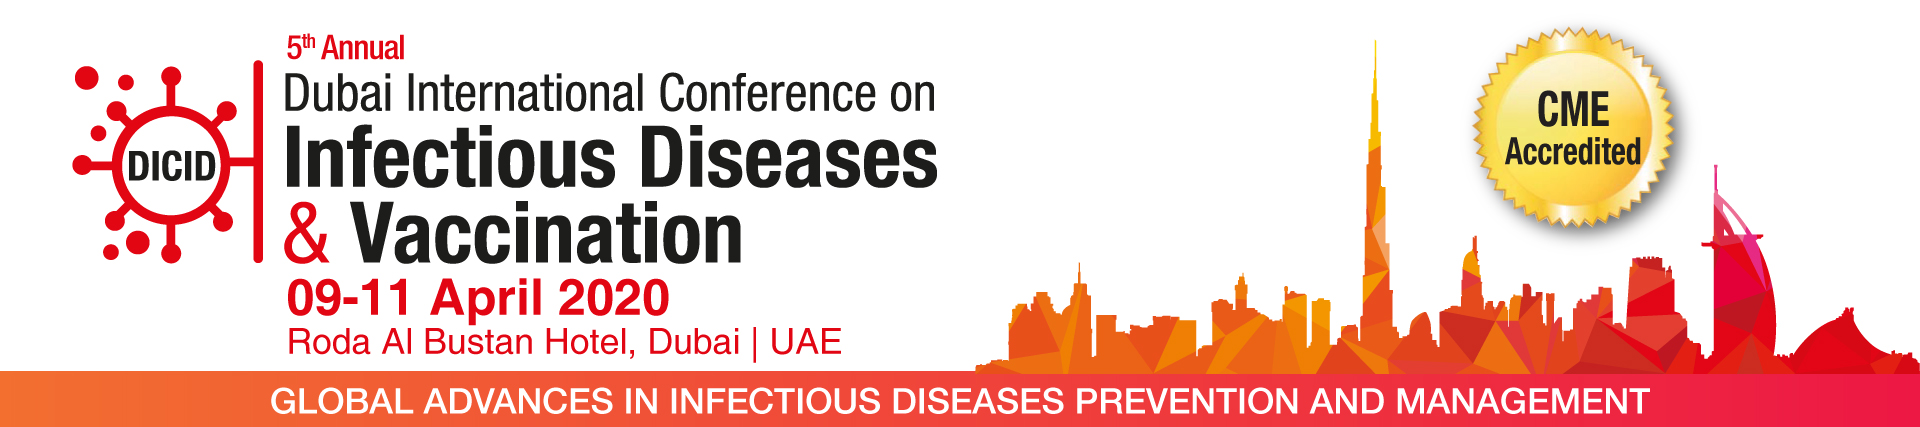 5th Dubai International Conference on Infectious Diseases and Vaccination, Dubai, United Arab Emirates